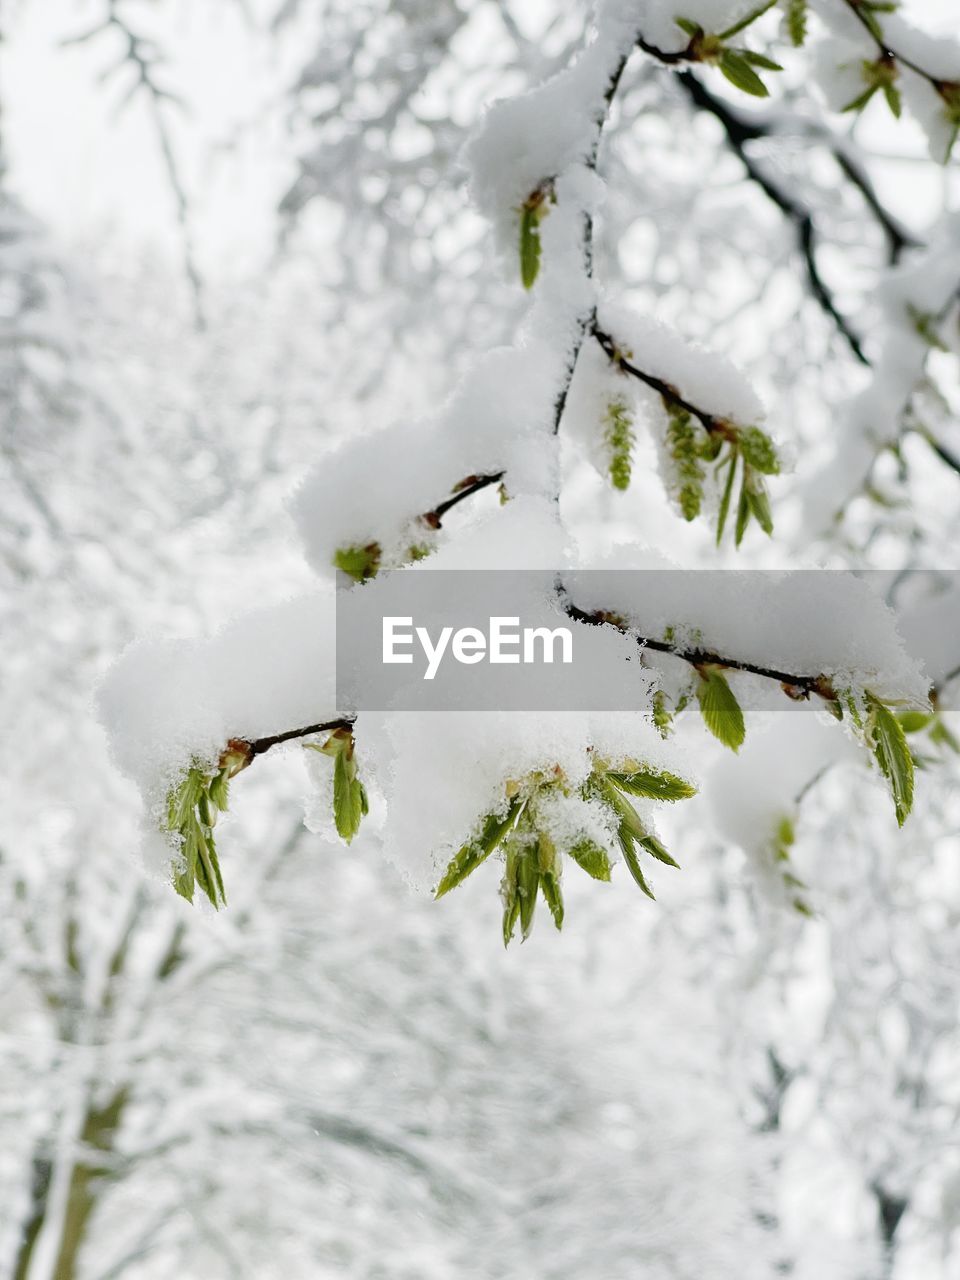 branch, plant, tree, snow, winter, cold temperature, nature, white, beauty in nature, no people, frozen, focus on foreground, twig, freezing, frost, leaf, ice, blossom, day, environment, flower, outdoors, spring, freshness, close-up, growth, coniferous tree, tranquility, pinaceae, forest, plant part, green, food and drink, food, land, pine tree